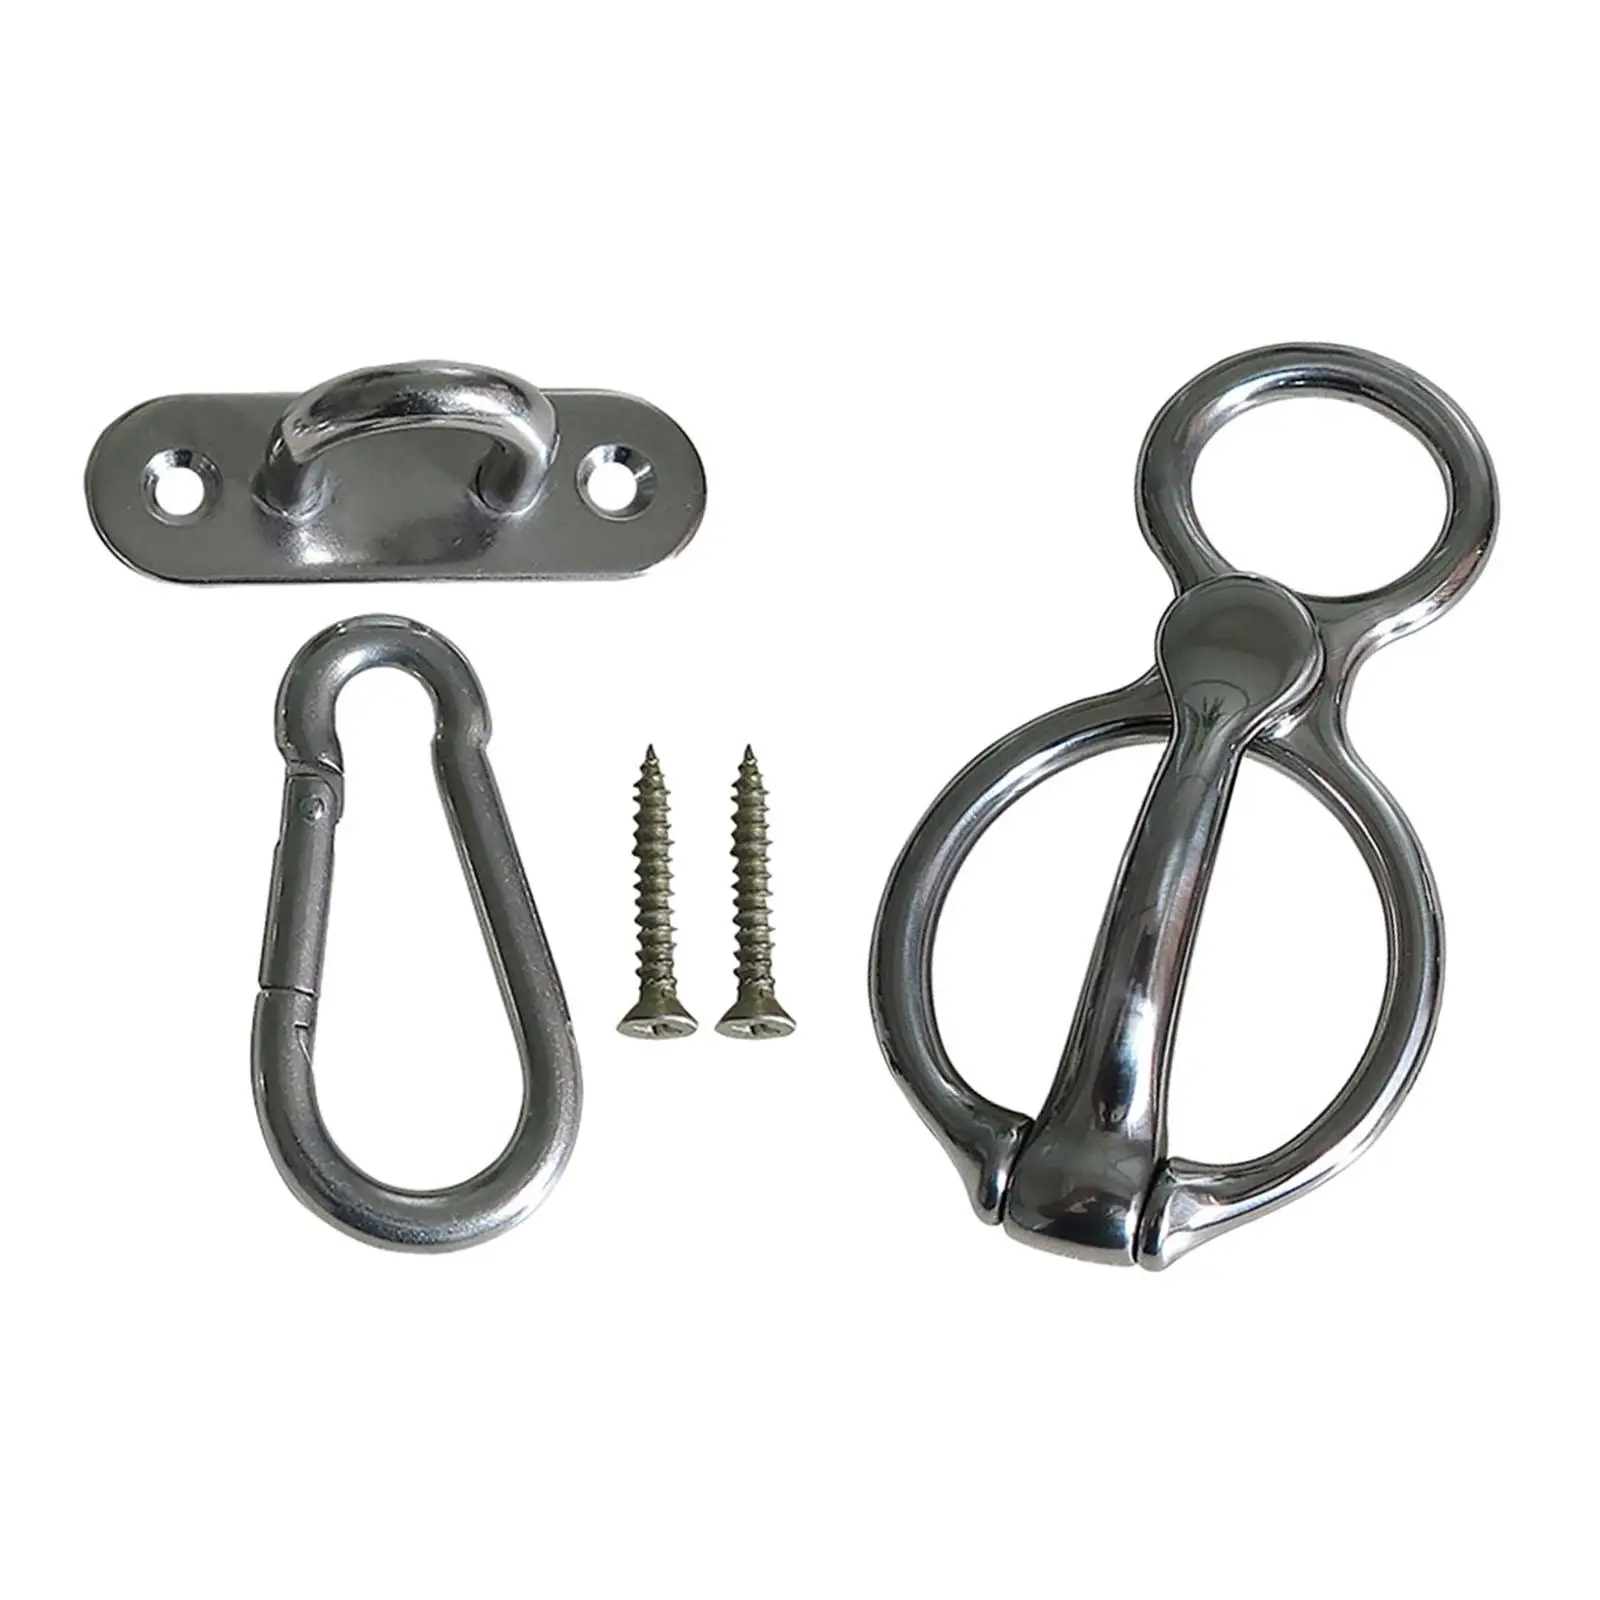 Horse Tie Ring Equestrian Hooks Outdoor Sports Prevent Horses from Pulling Back Fasteners with Eye Bolt Horse Tack Supplies